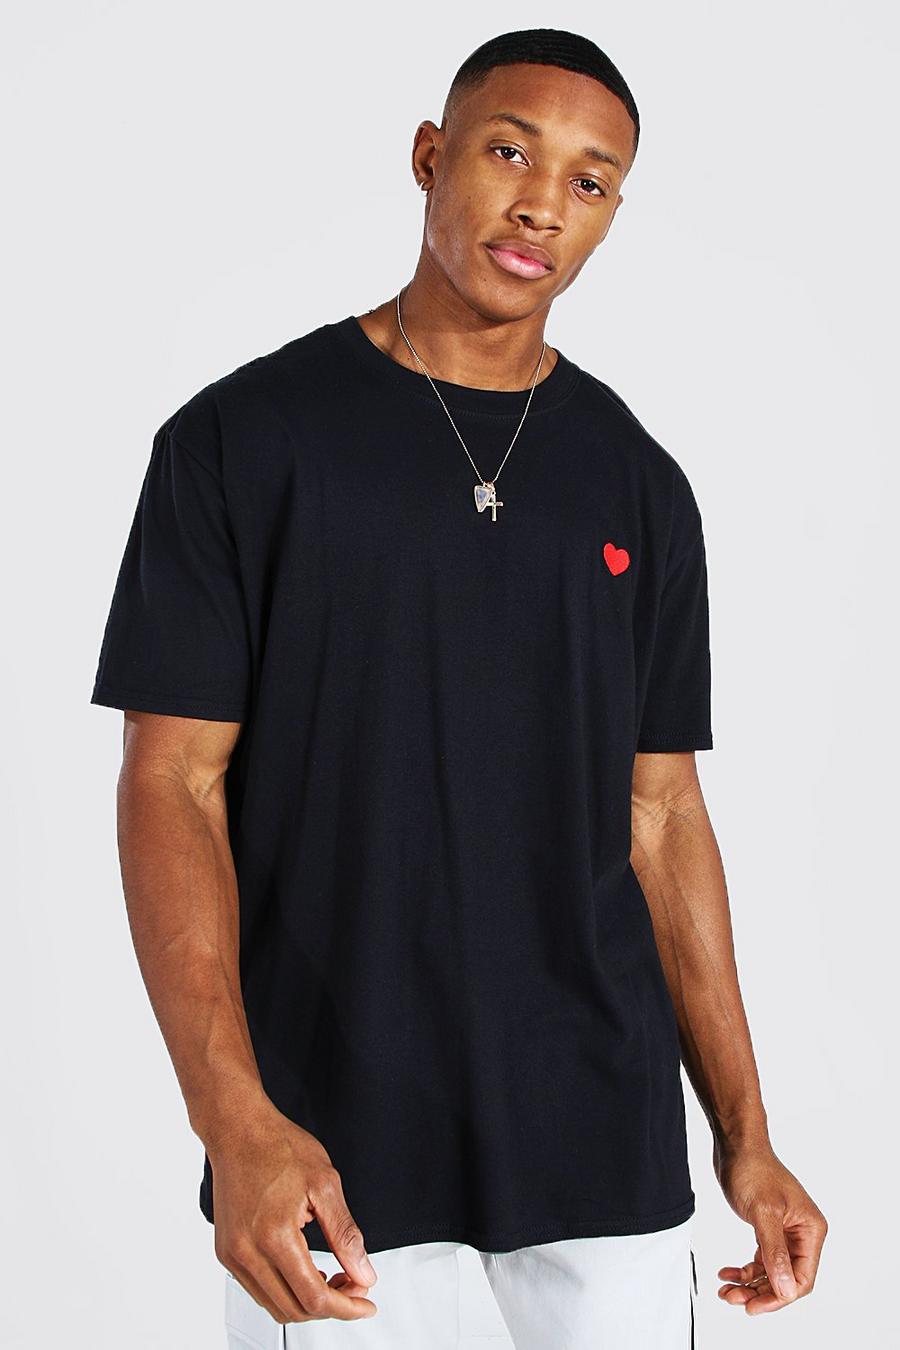 Black Heart Embroidered T-shirt